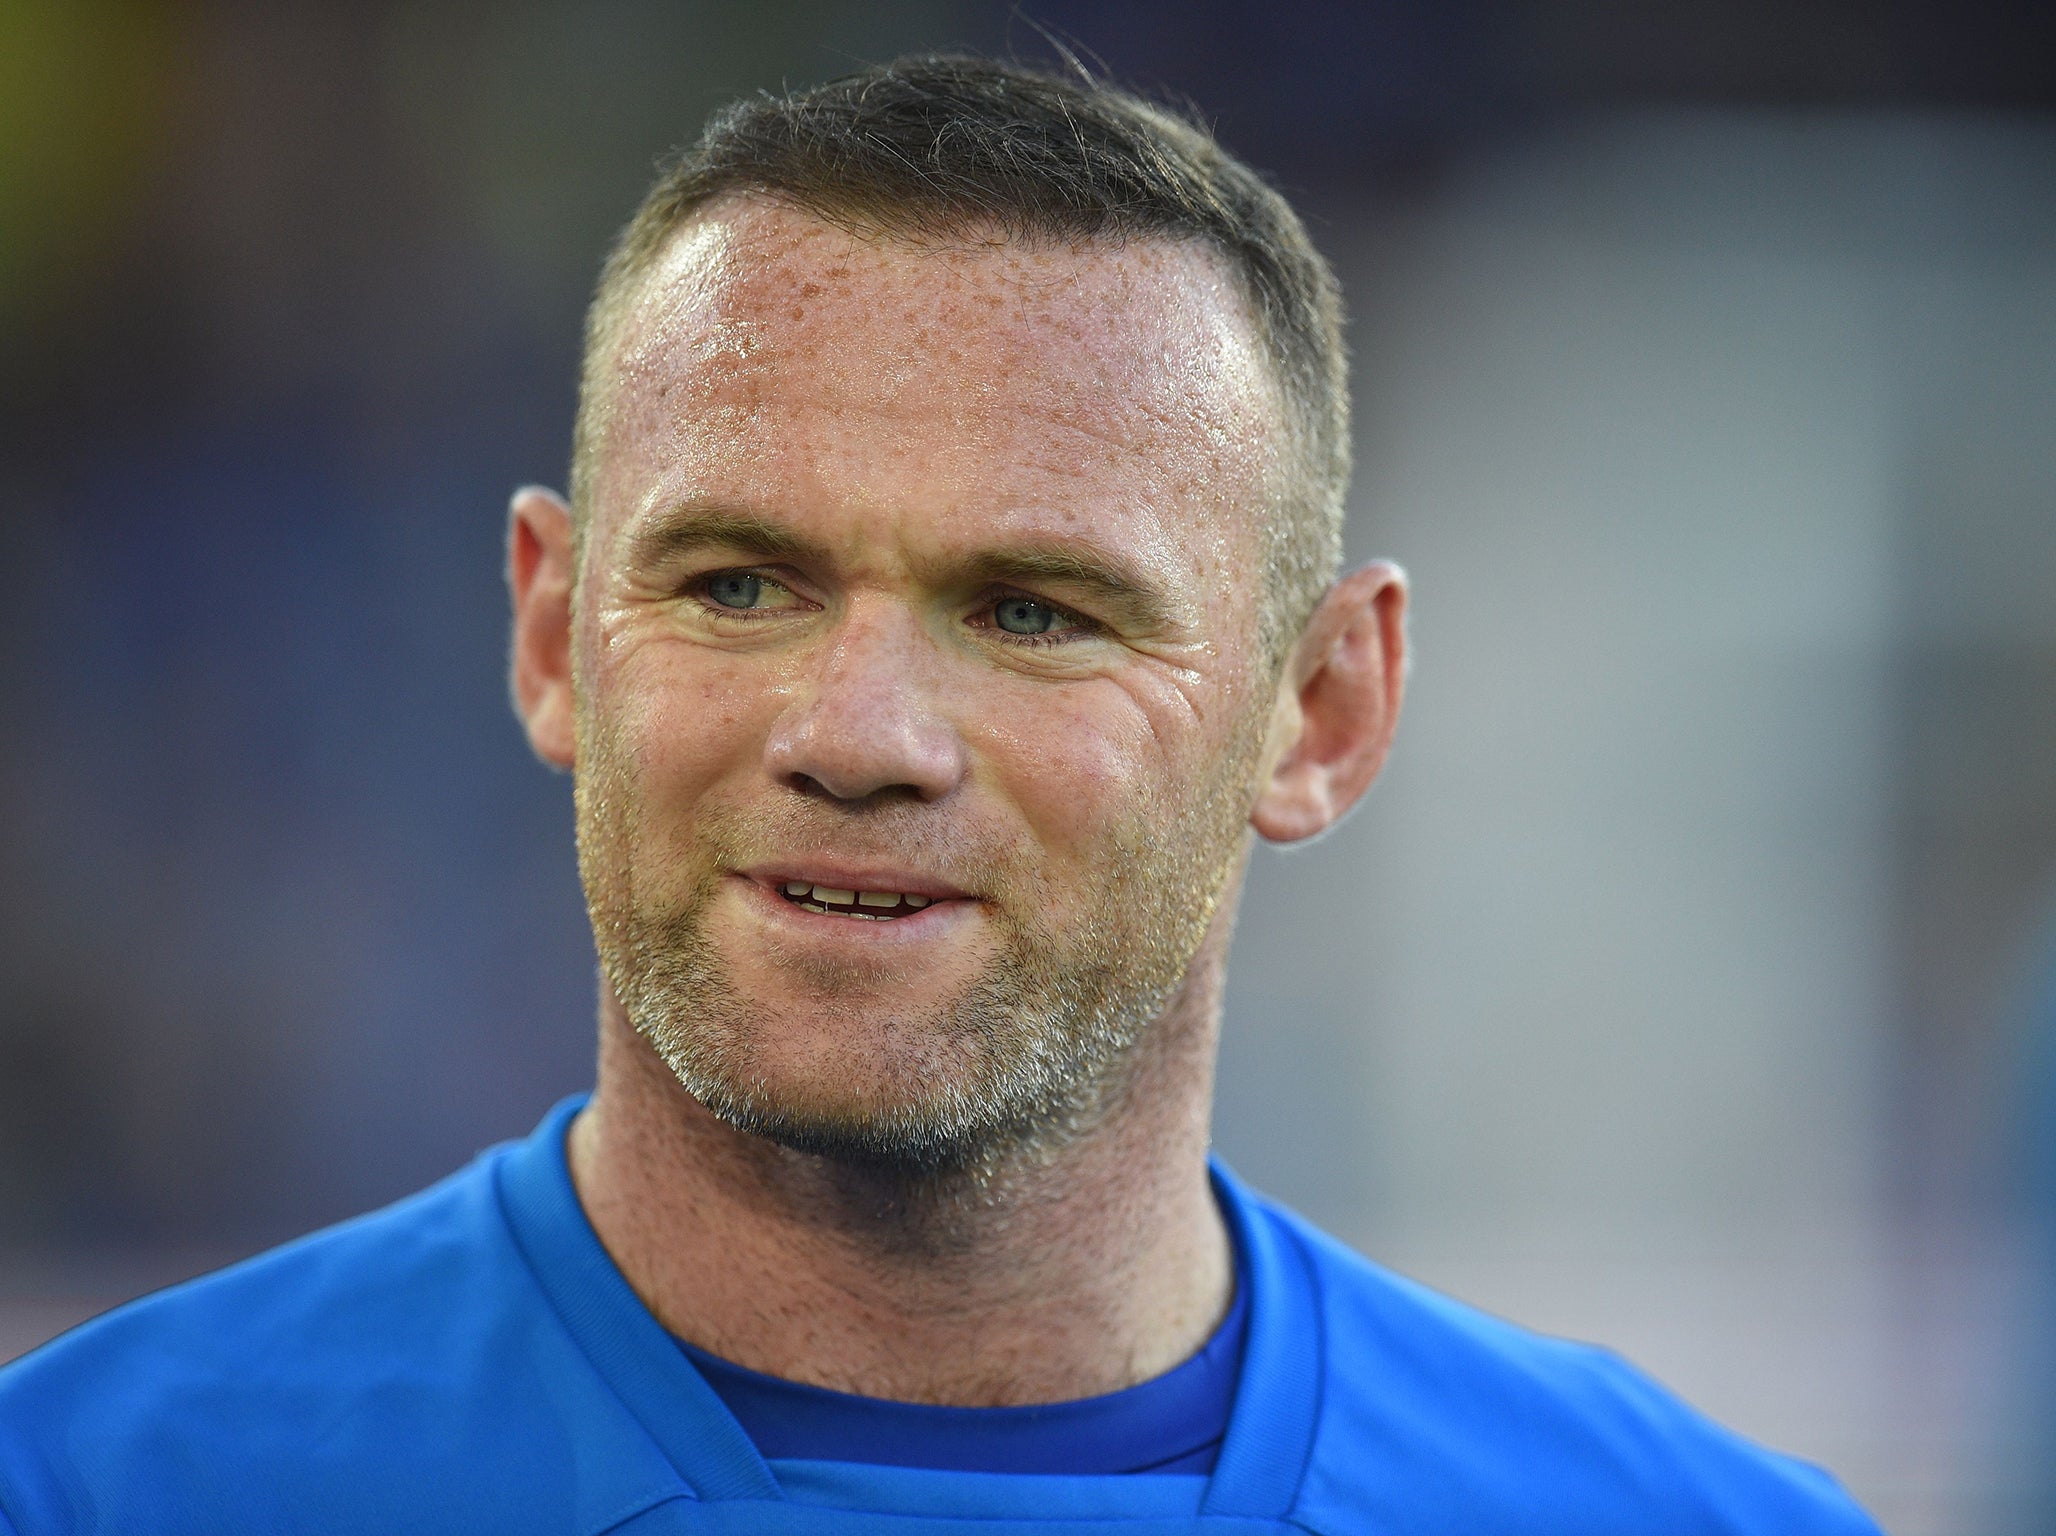 Ronald Koeman is "very disappointed" with Wayne Rooney's actions